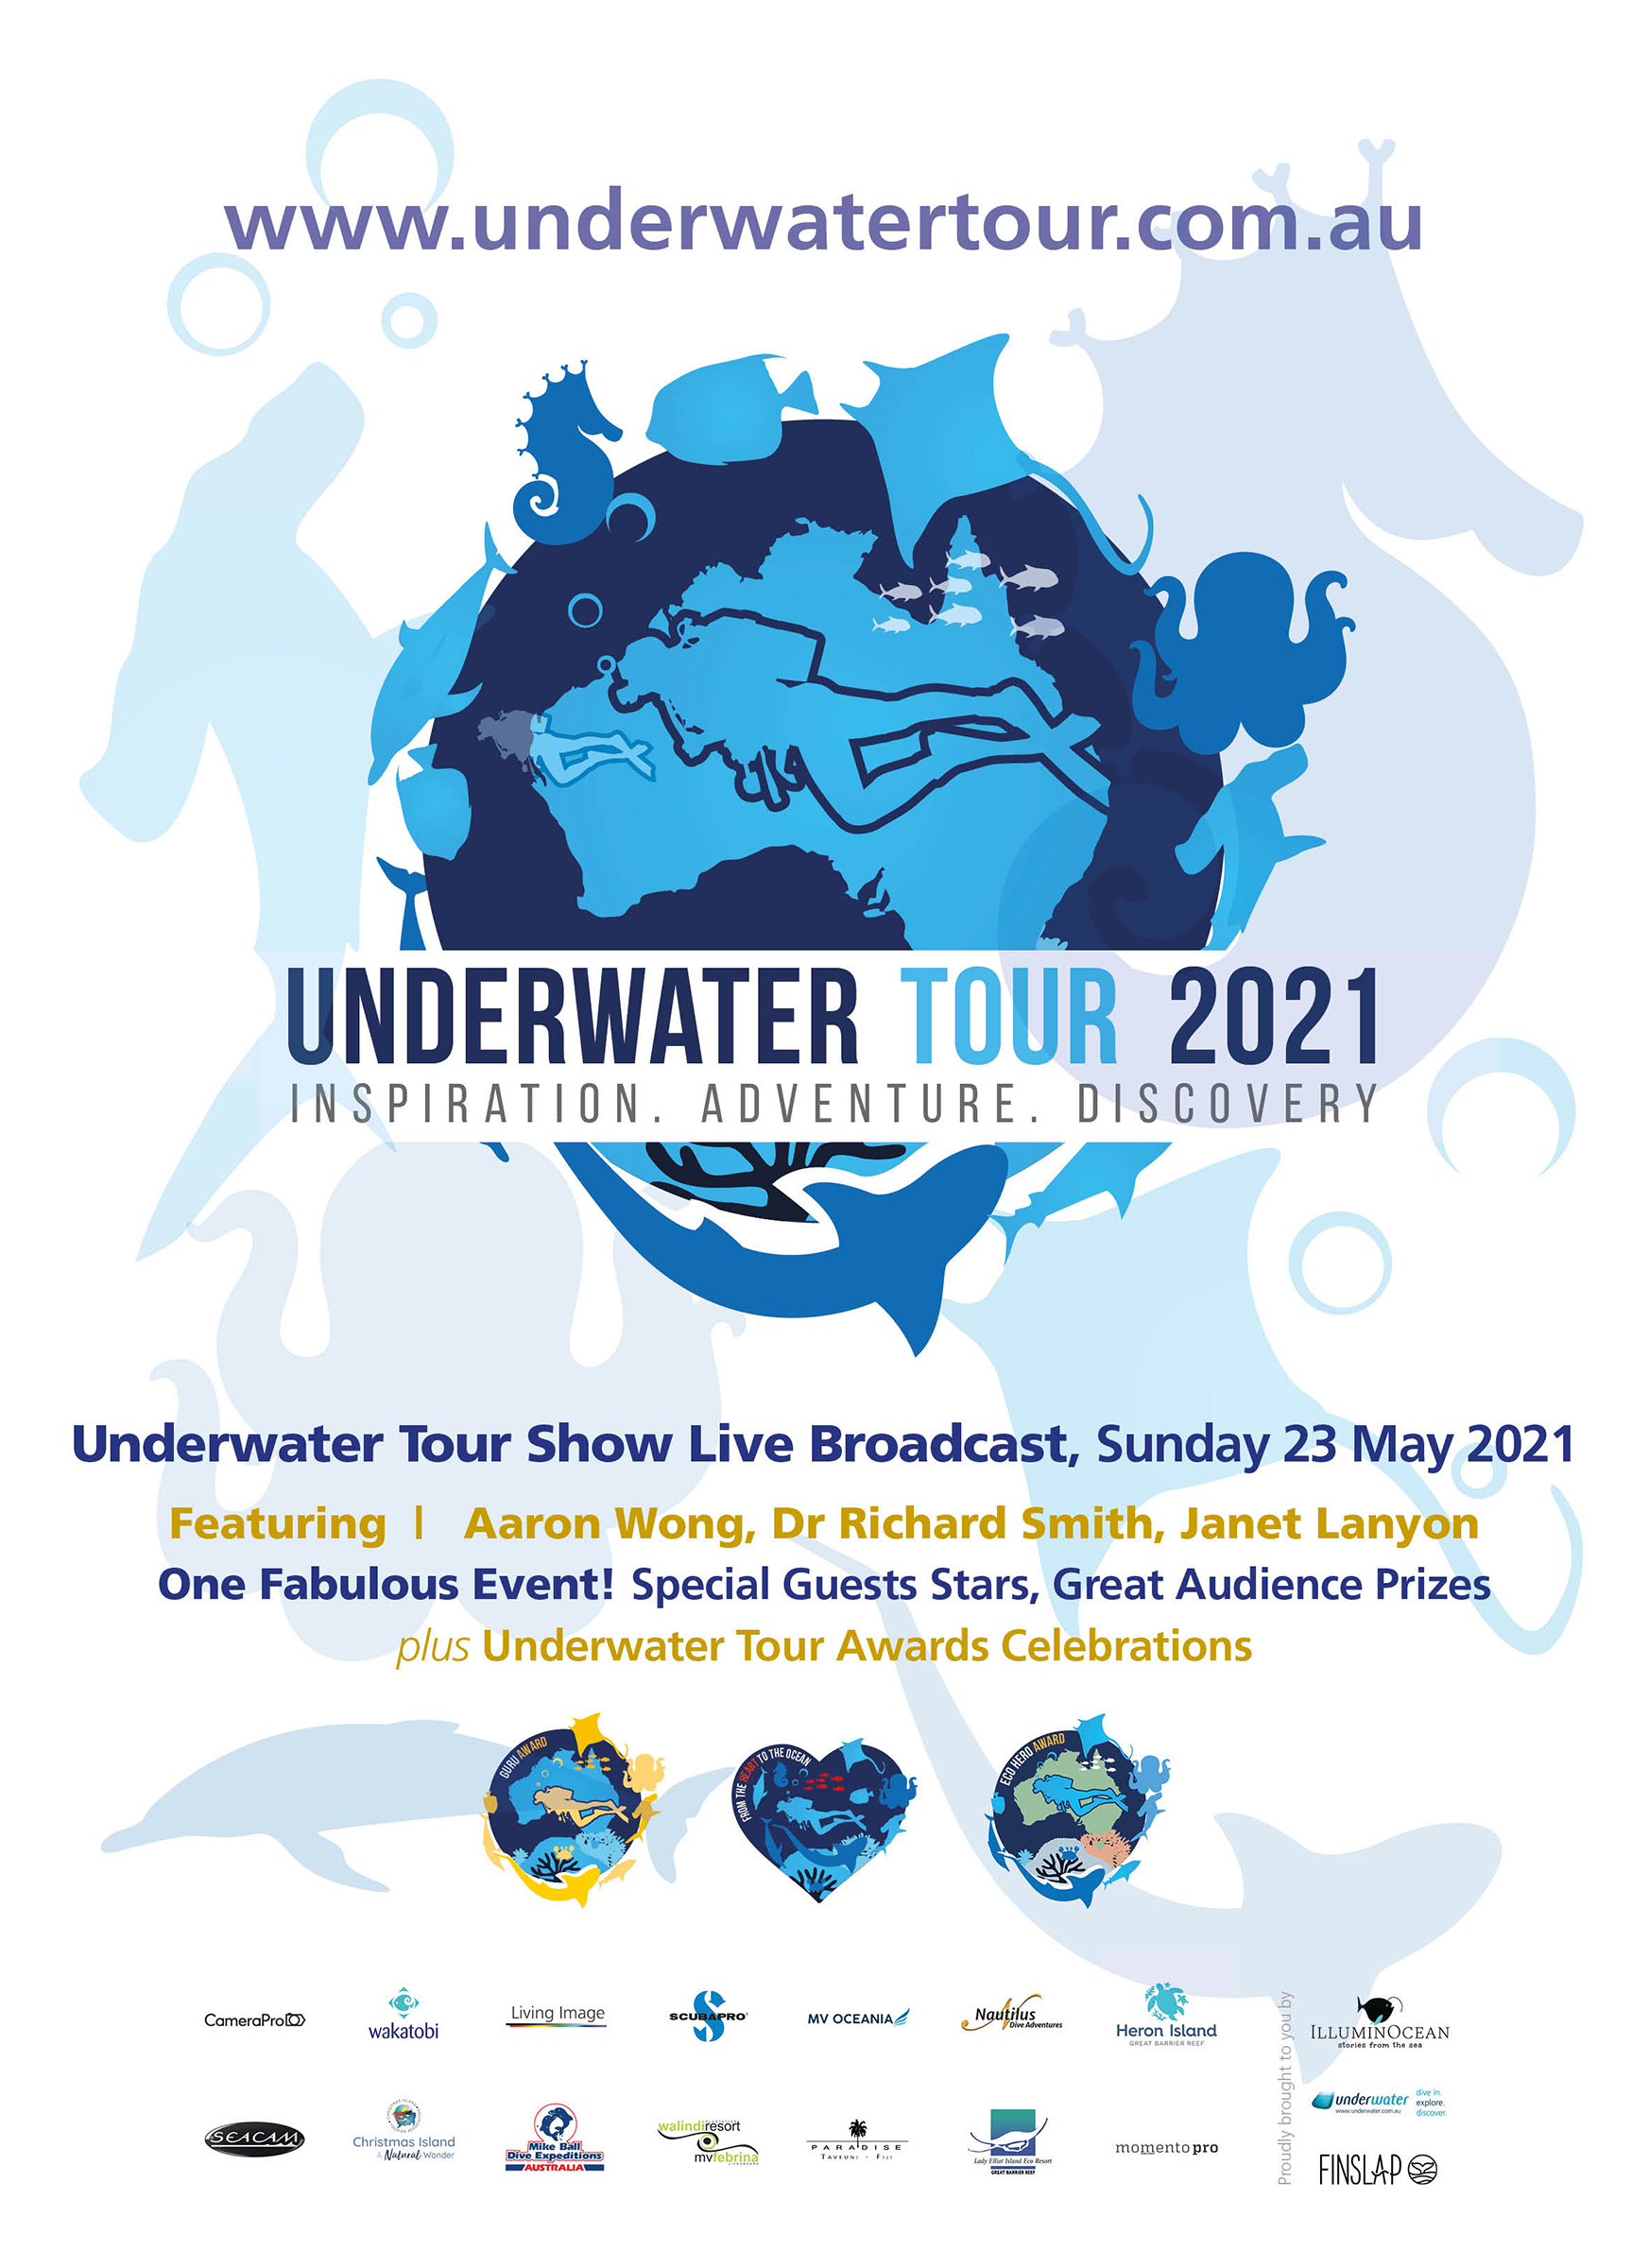 Underwater Tour Show Free Silver and Gold Tickets available 